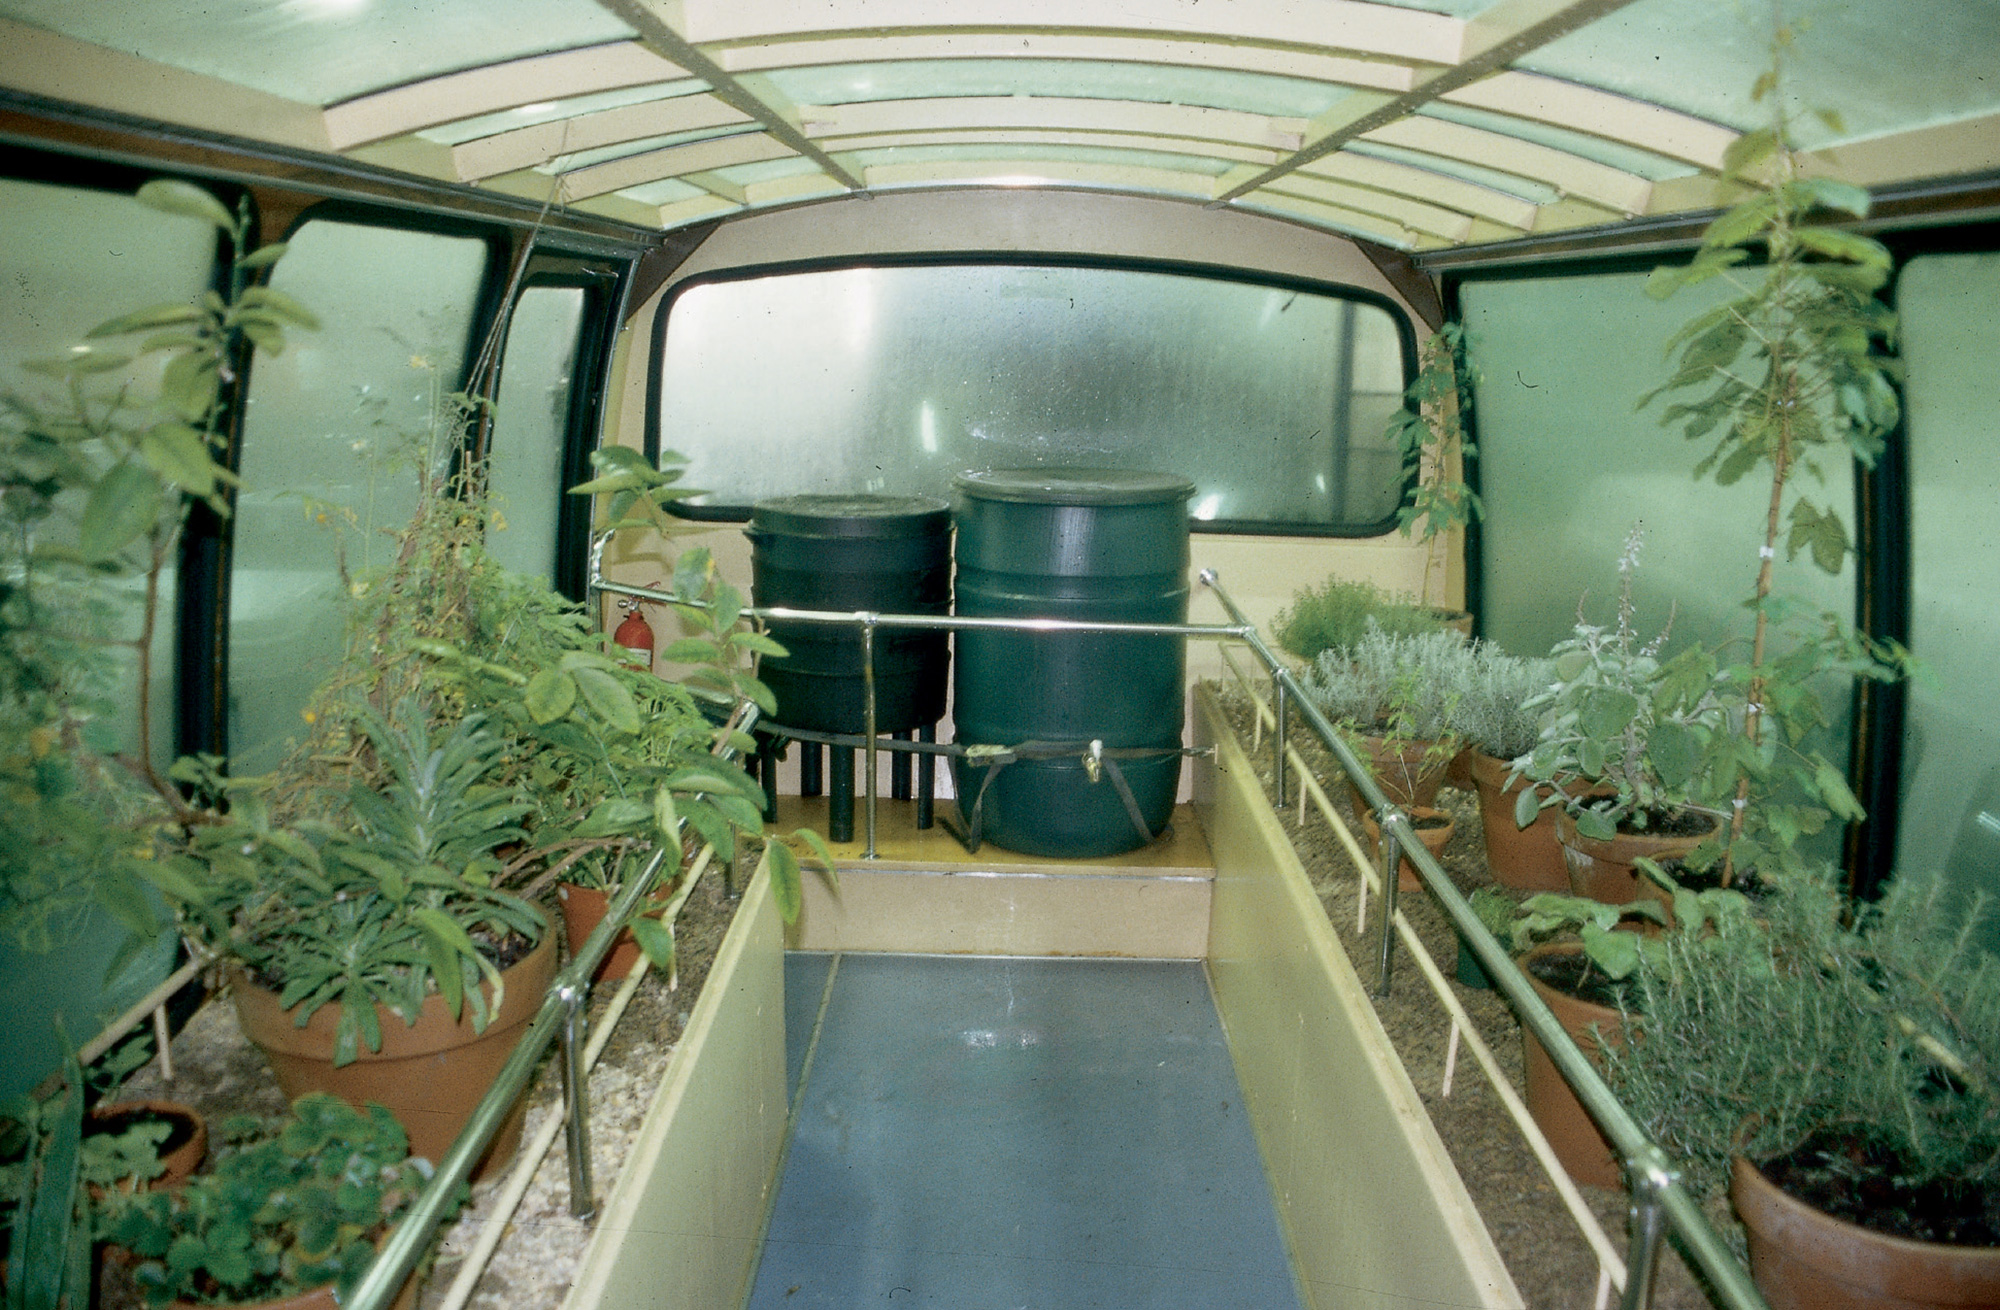 An image from an artwork entitled “Proposed Redevelopment of the Oval, Hackney E2, London” showing the interior of a bus reconfigured as a mobile greenhouse filled with growing plants.